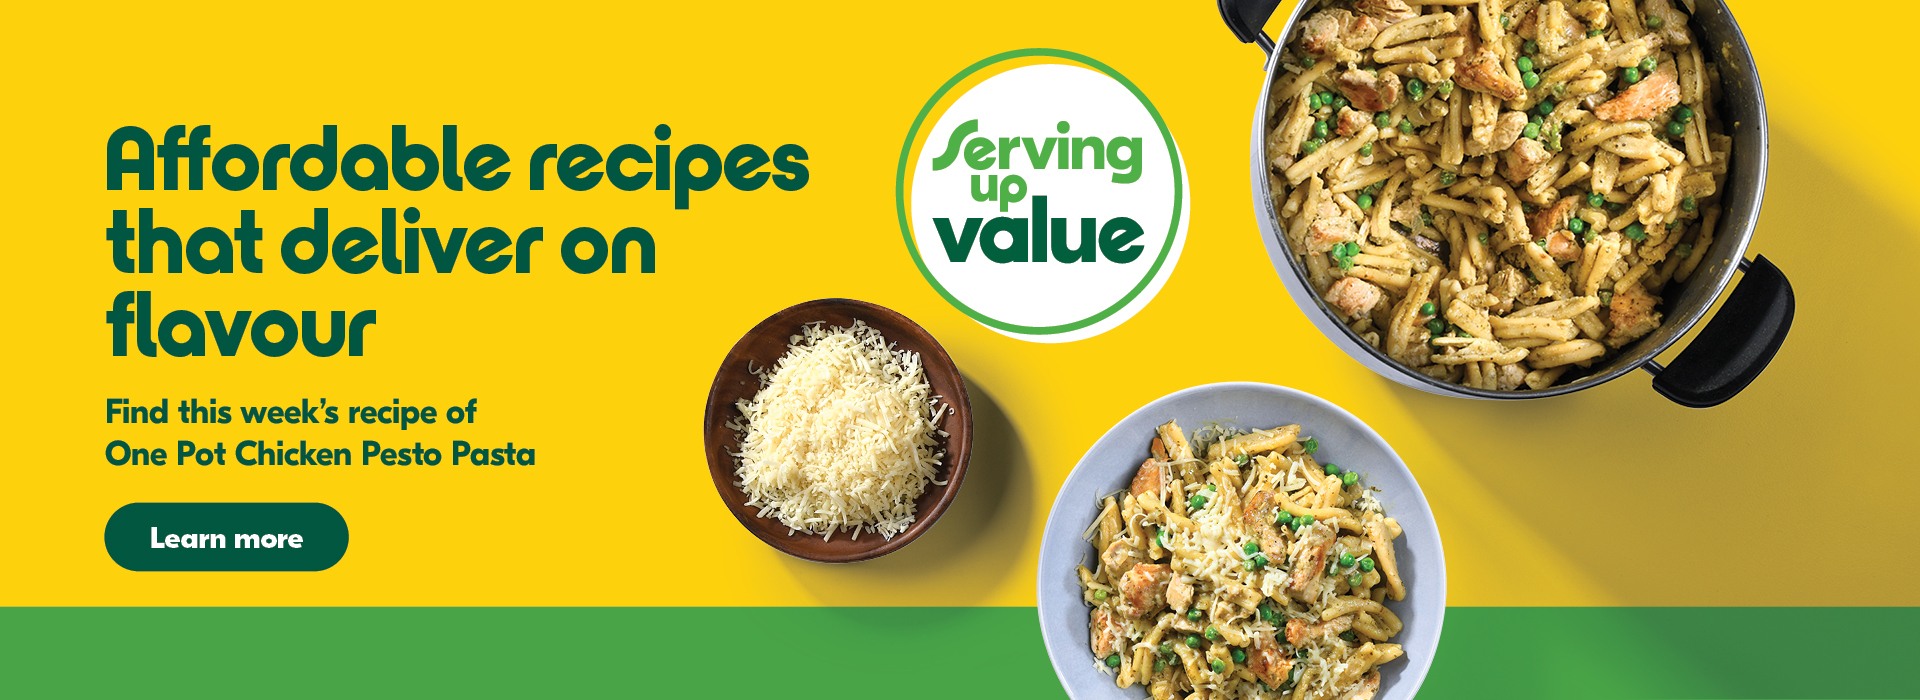 Affordable recipes that deliver on flavour. Find this week's recipe of One Pot Chicken Pesto Pasta